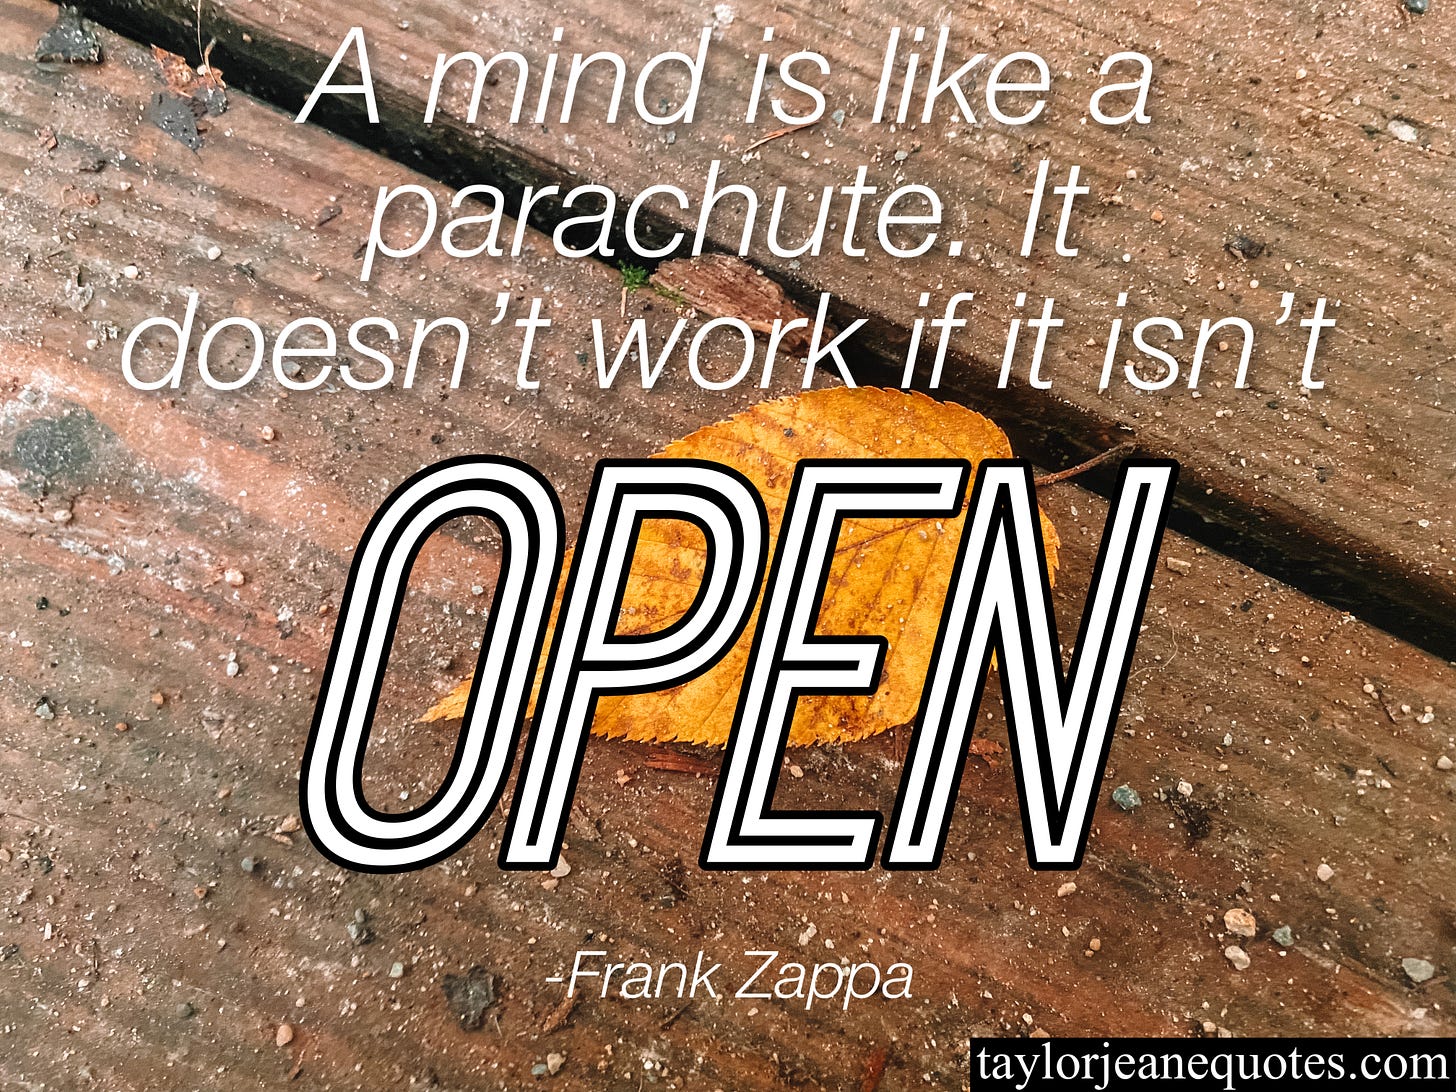 taylor jeane quotes, taylor jeane, taylor wilson, quotes, quote of the day, quote of the day email subscription, quote of the day subscription, motivational quotes, inspirational quotes, positive quotes, open mindedness quotes, open minded quotes, frank zappa, frank zappa quotes, mindset quotes, parachute quotes, the mind is like a parachute quote, life quotes, positive thinking quotes